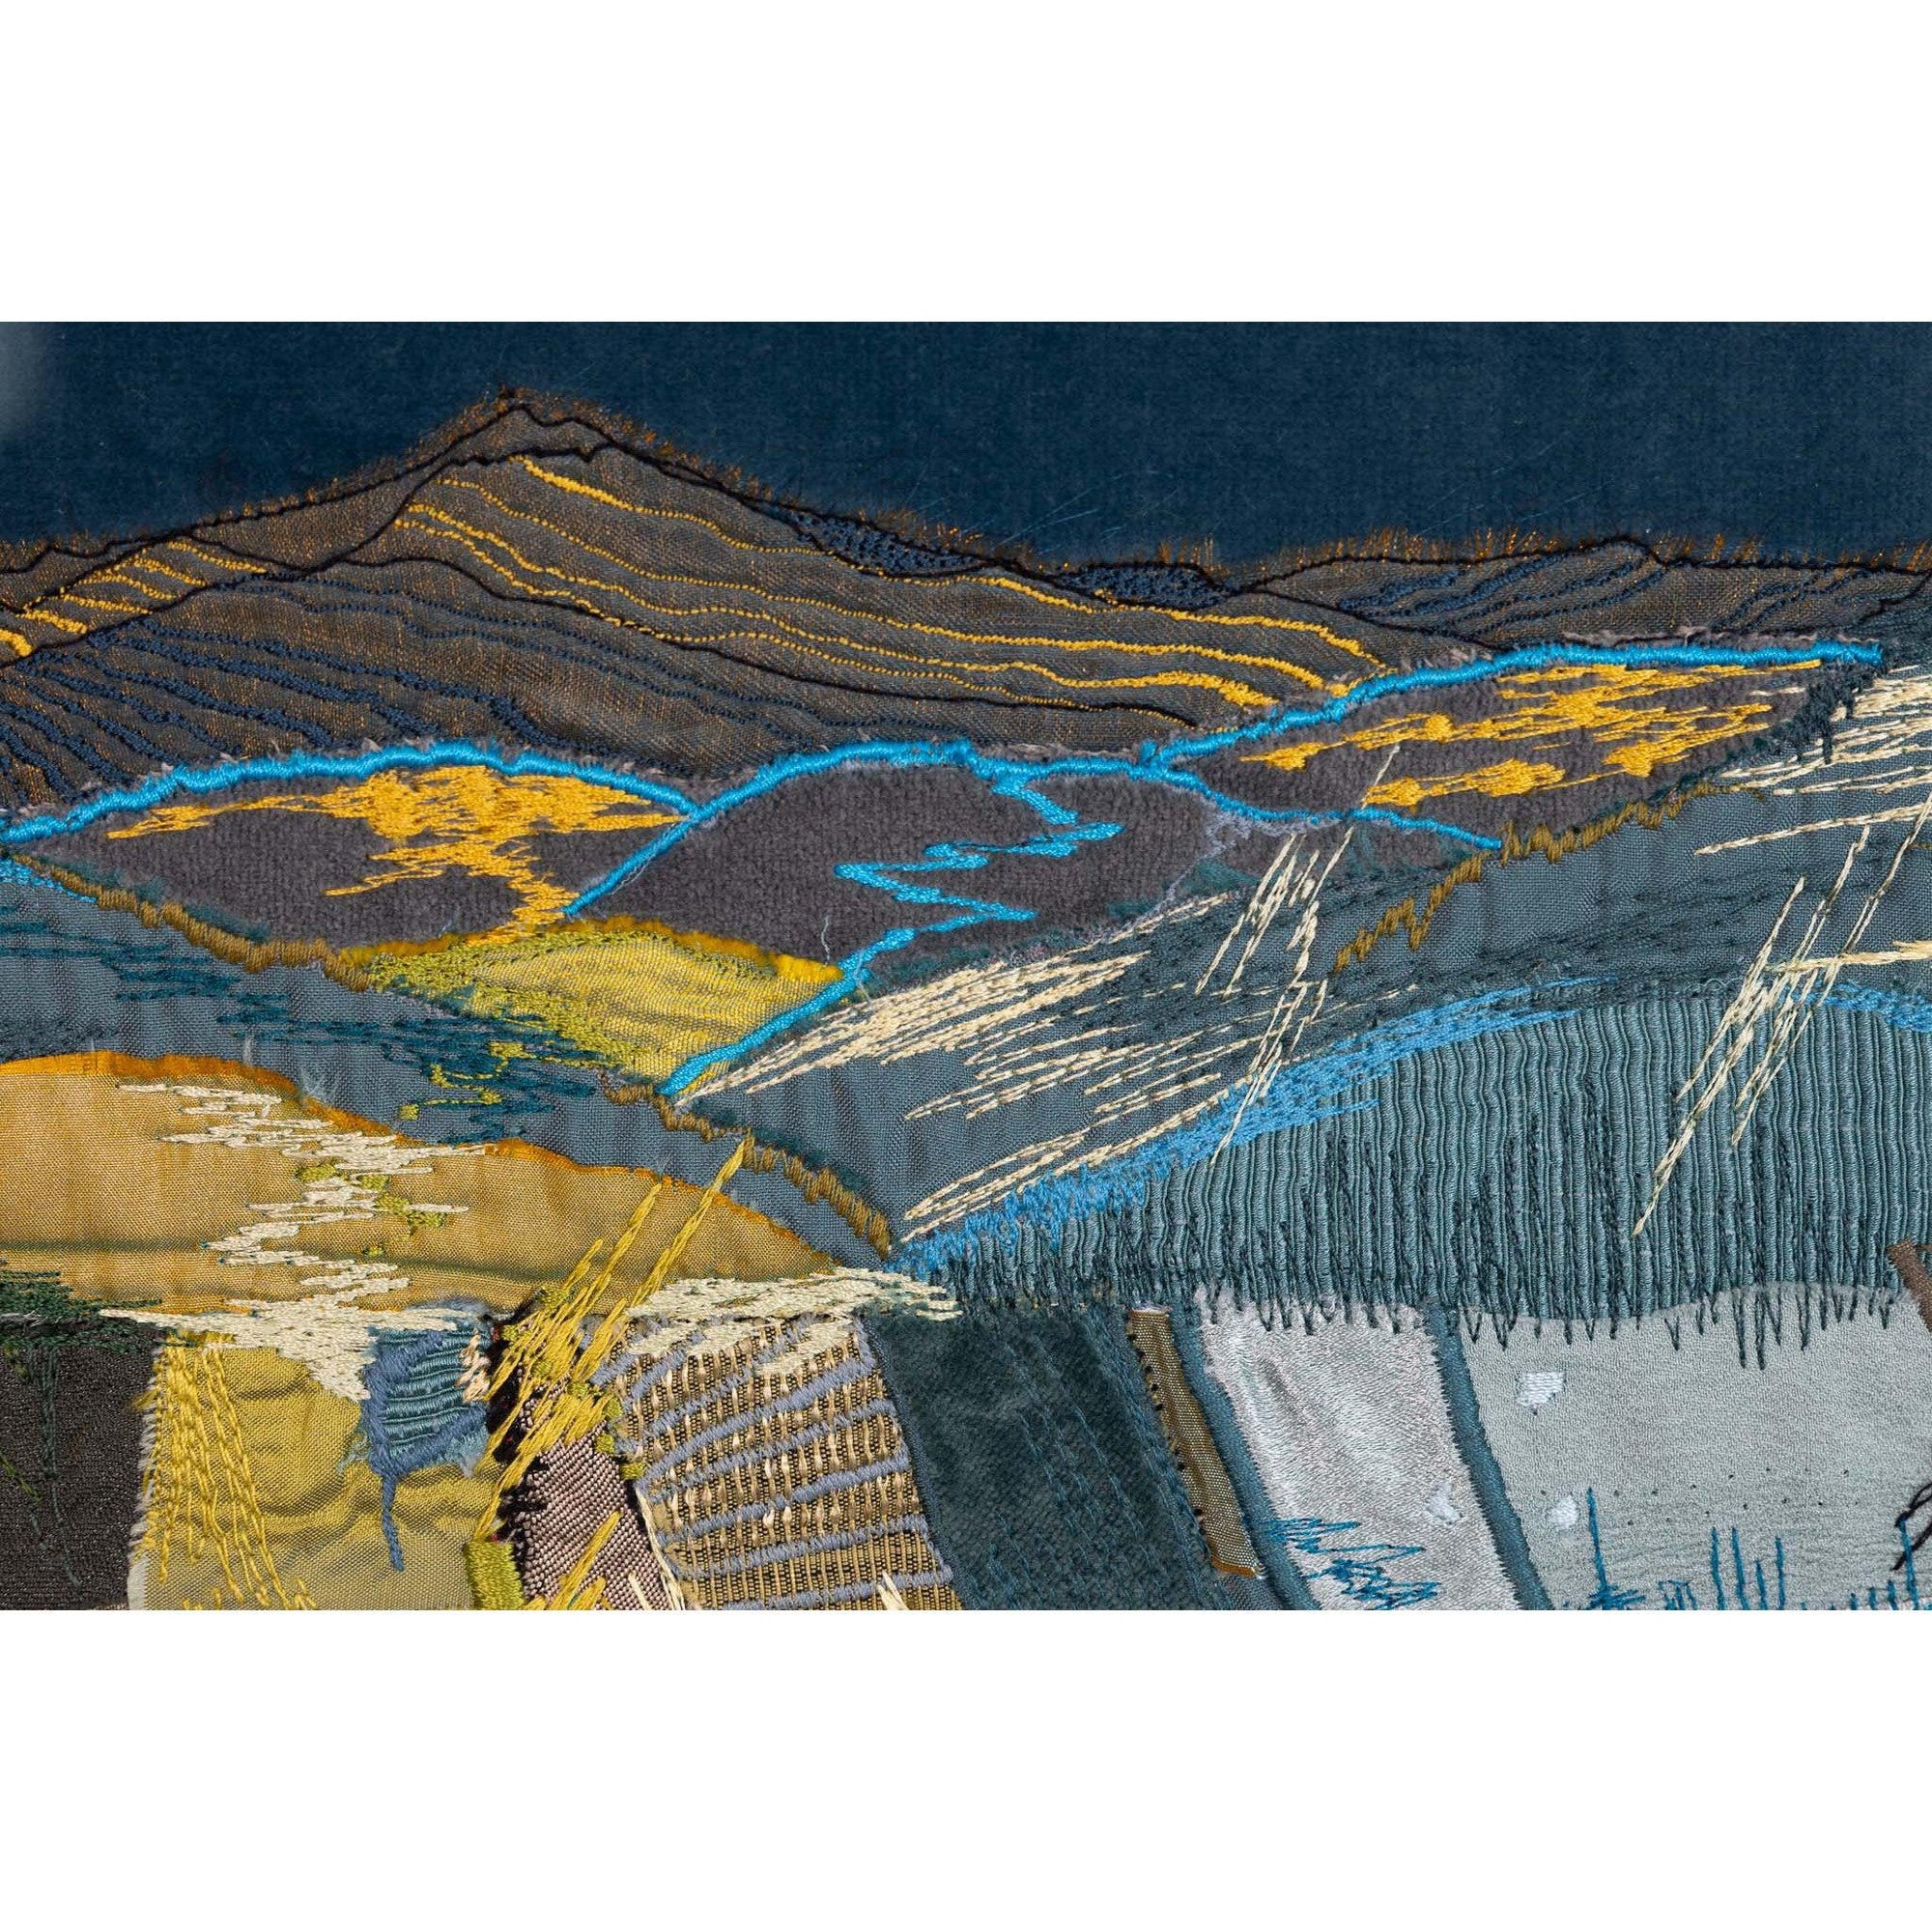 'Fields and Hills' dynamic stitched textiles by Sarah Pooley, available at Padstow Gallery, Cornwall